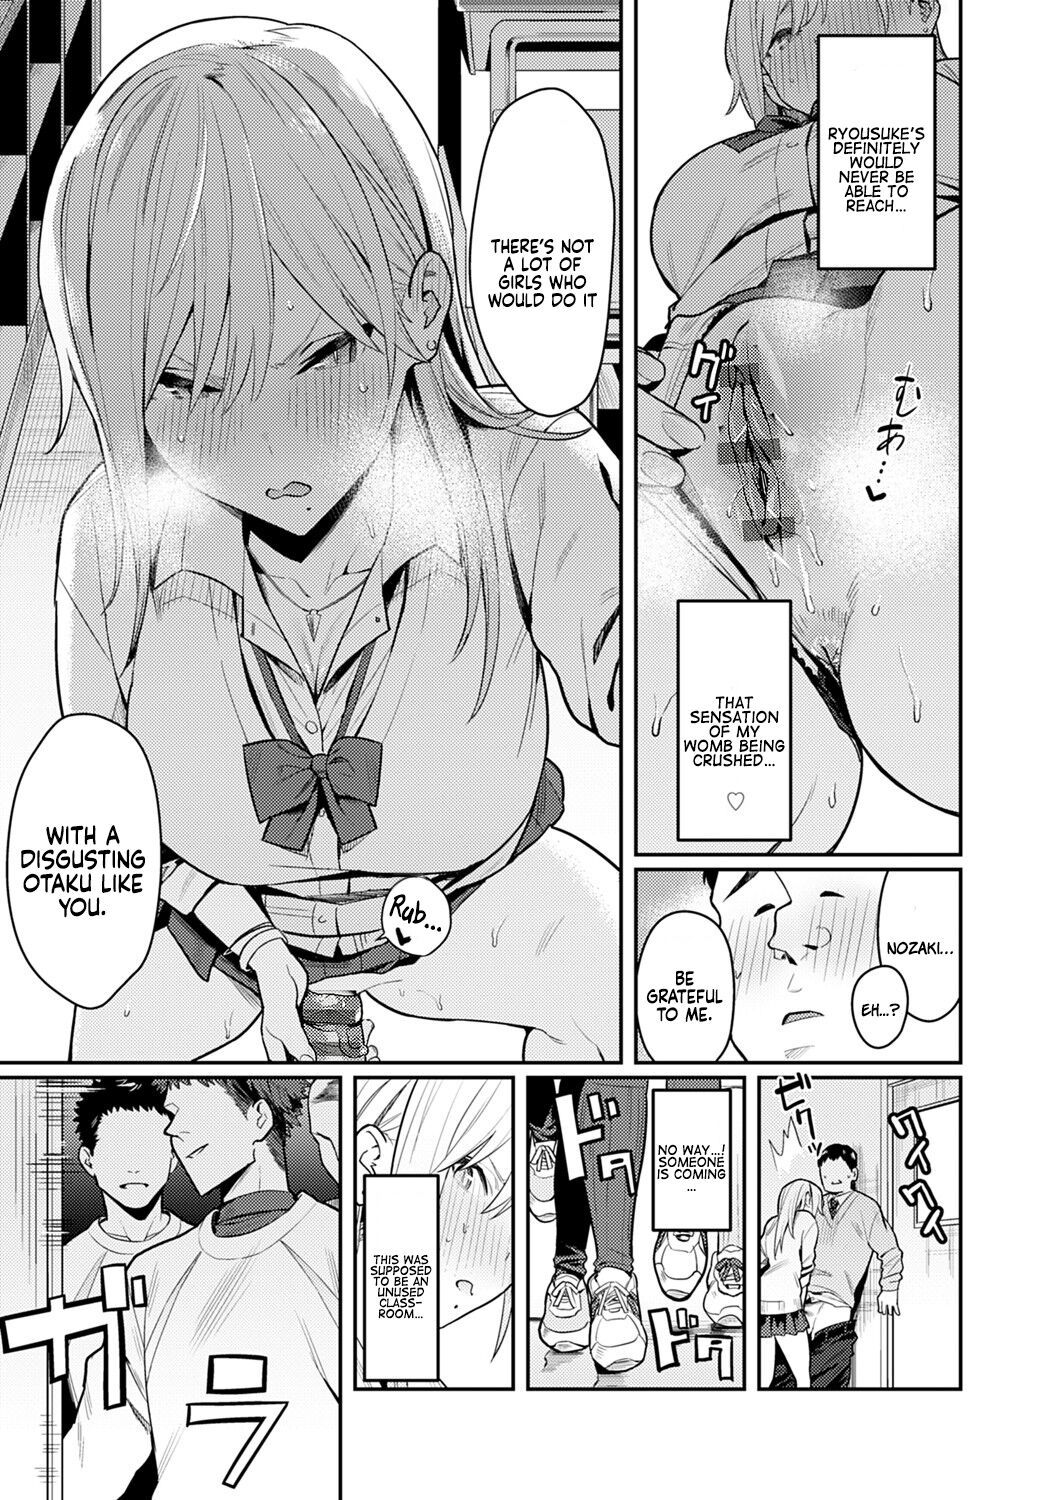 Totally Disgusting - The Beauty And The Beast - The Gyaru And The Disgusting Otaku Porn Comic  english 25 - Porn Comic